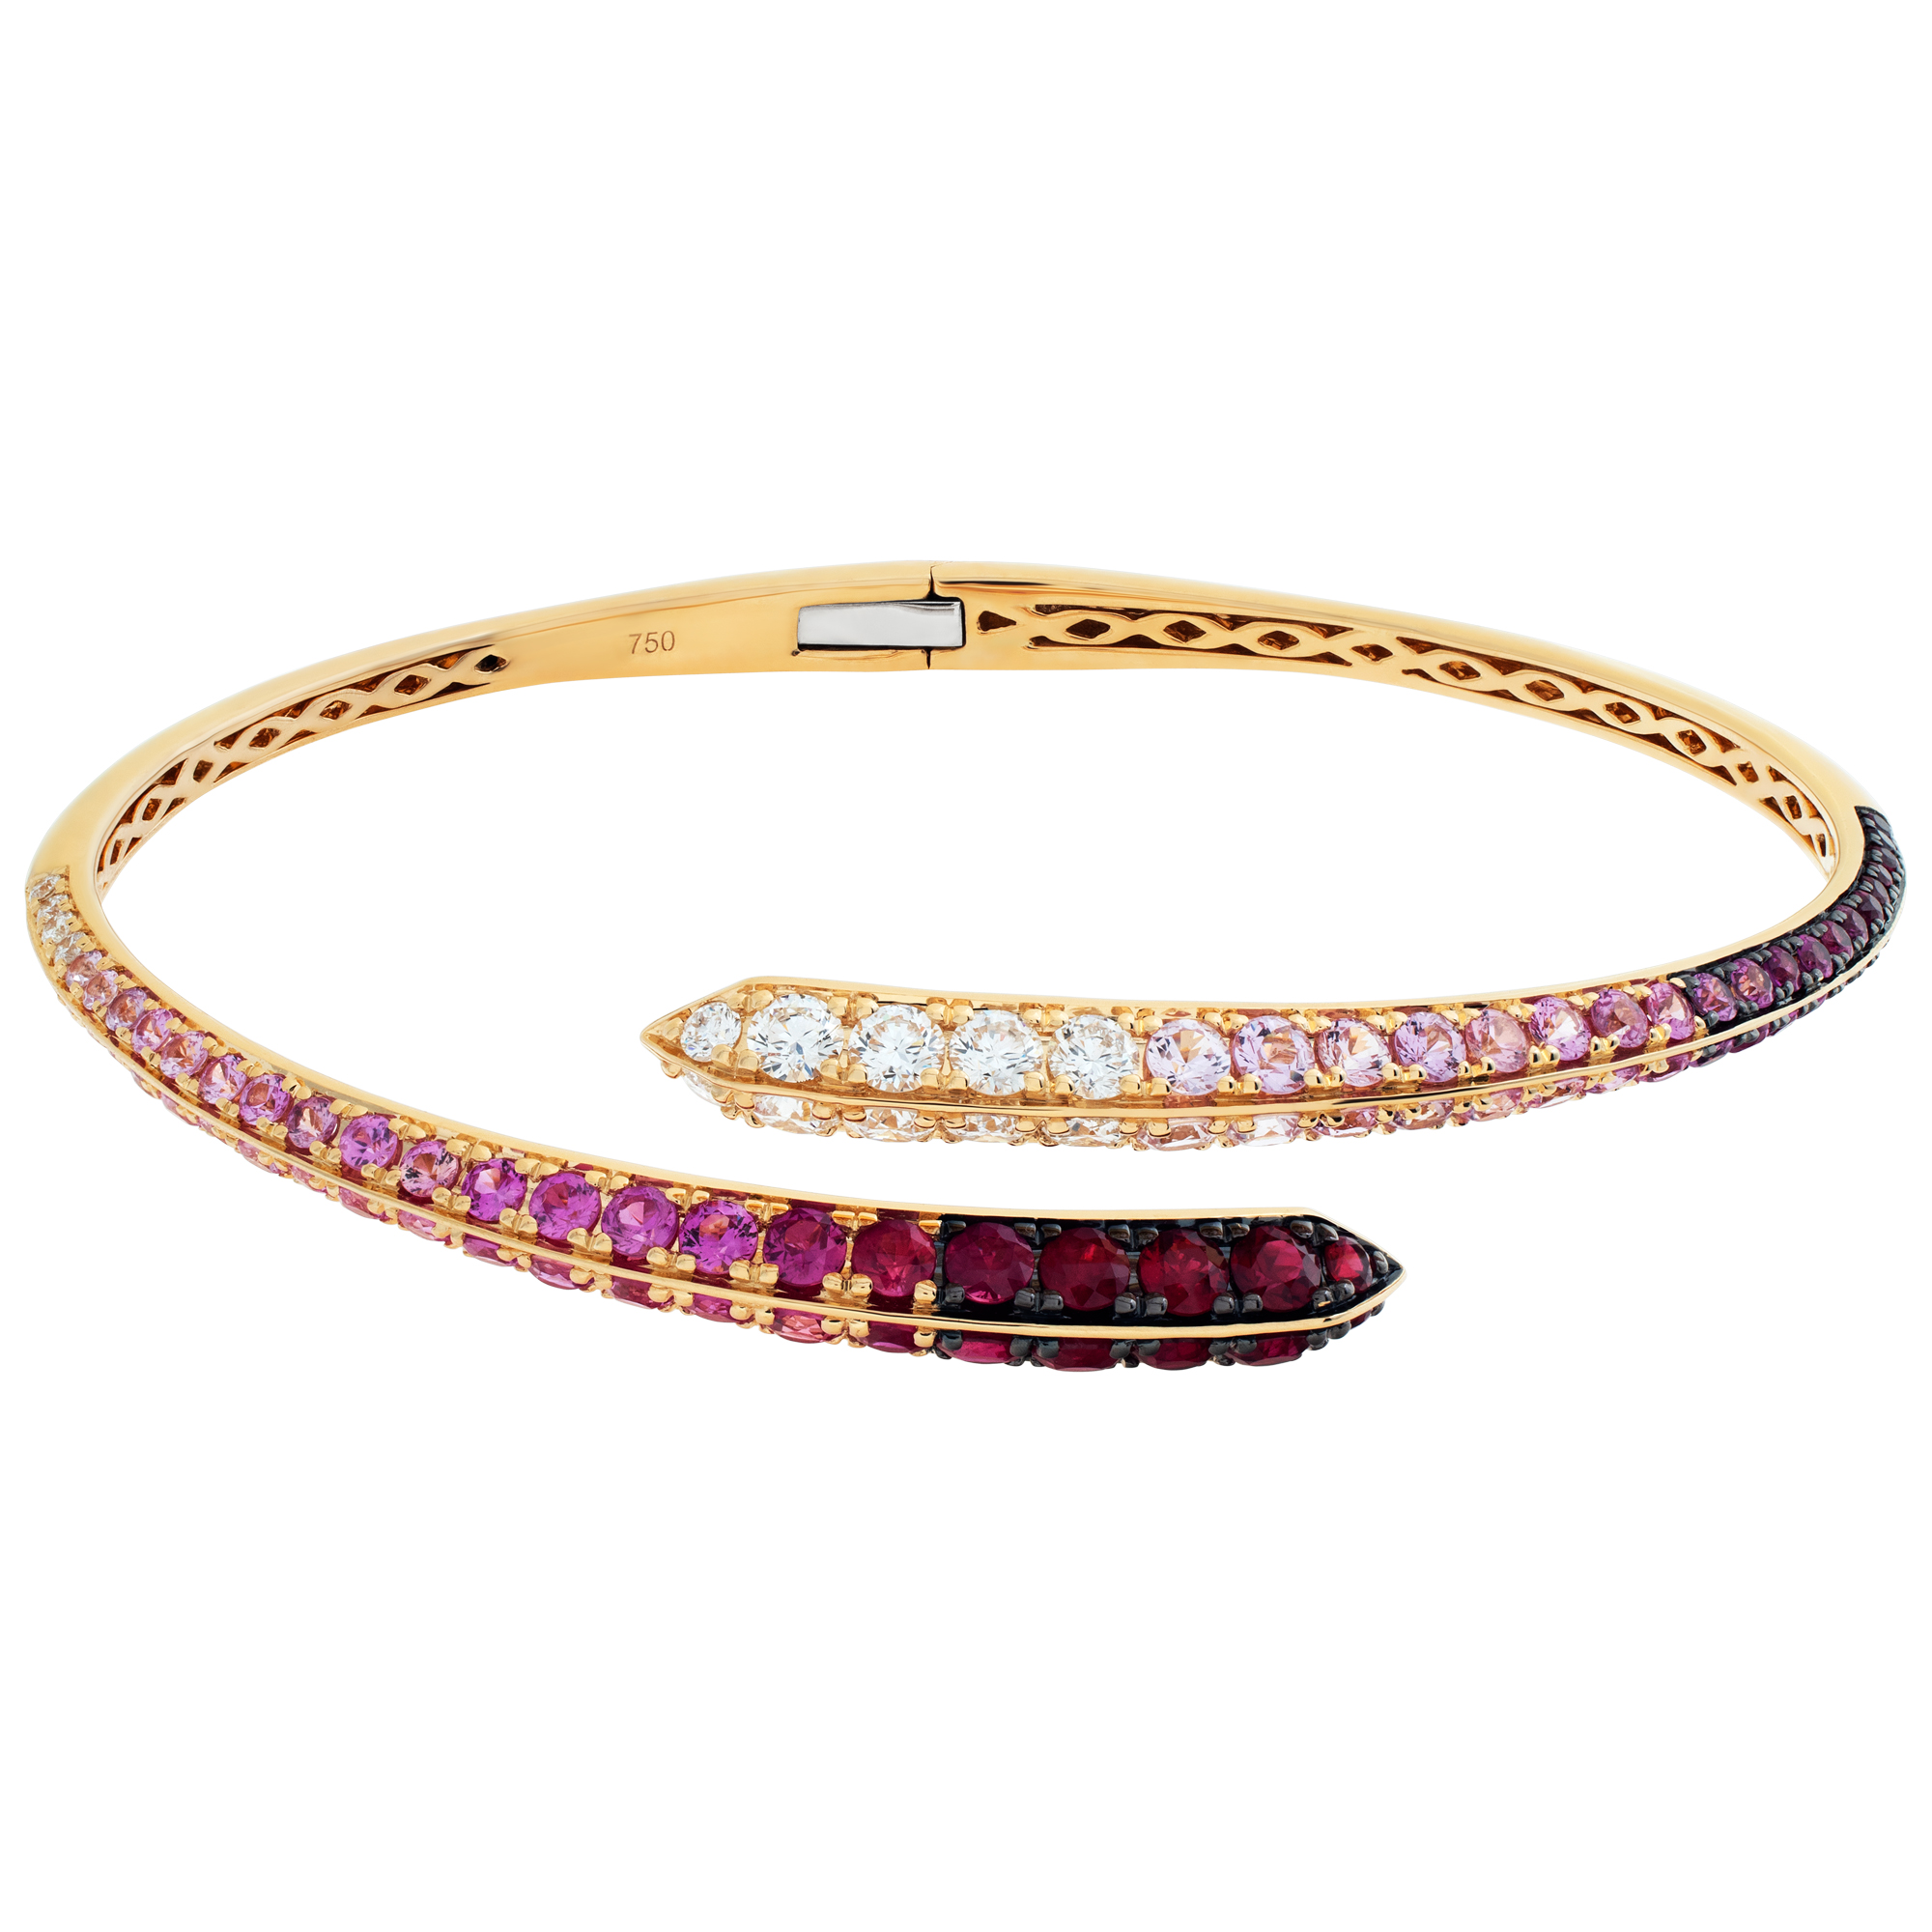 18k yellow gold bangle with diamonds, rubies, and pink sapphires (Stones)